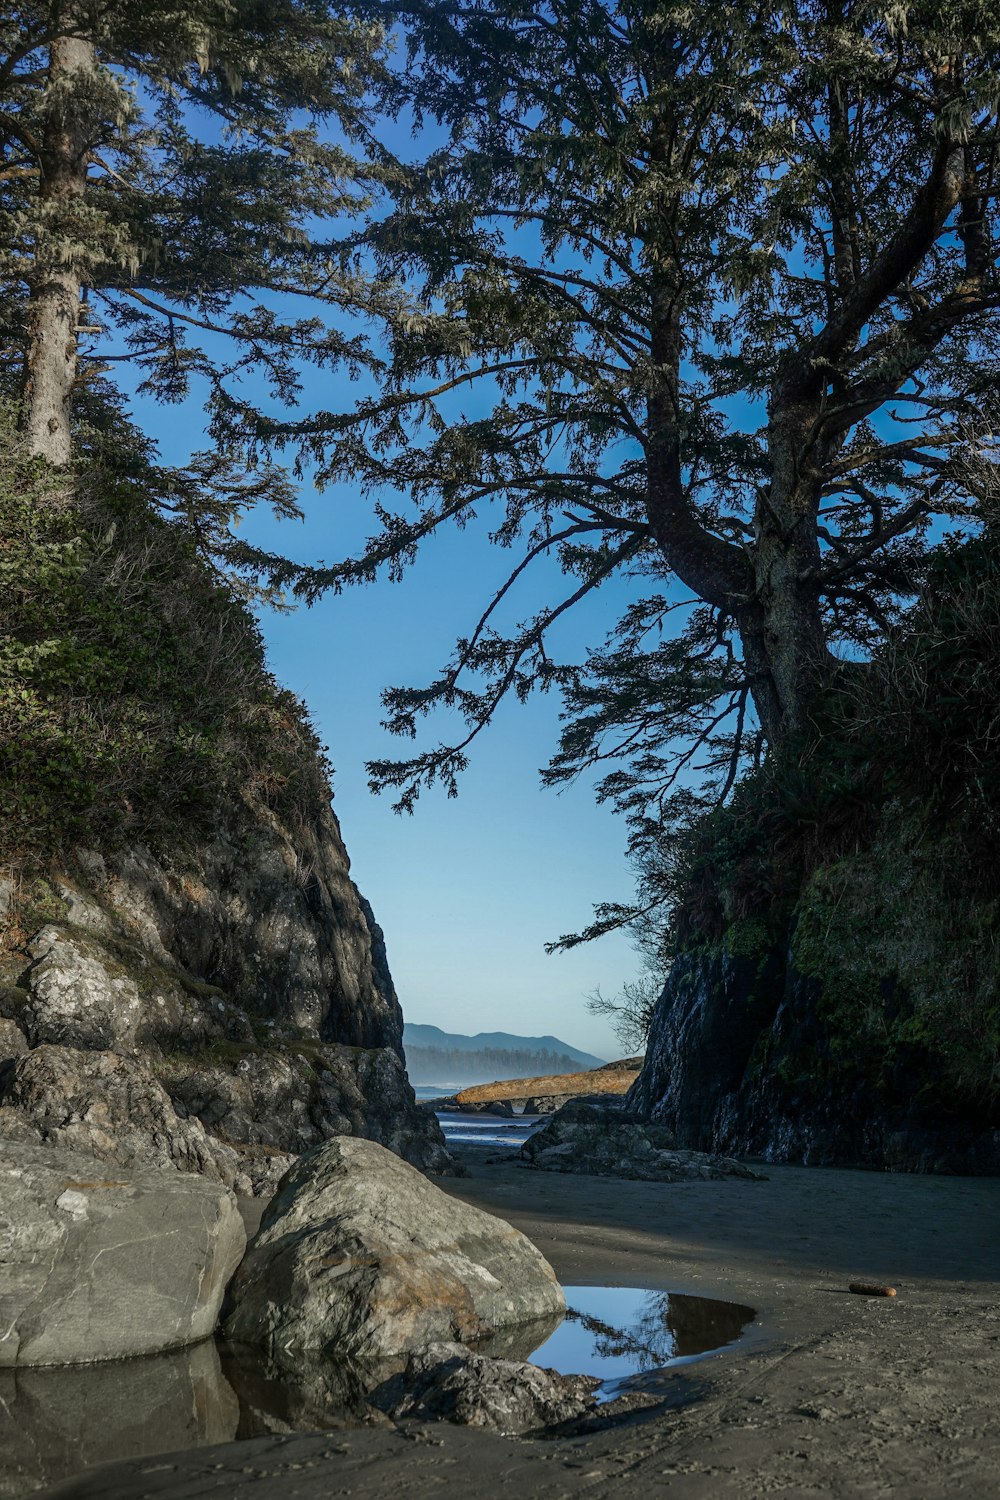 a large rock sitting on top of a beach next to a tree